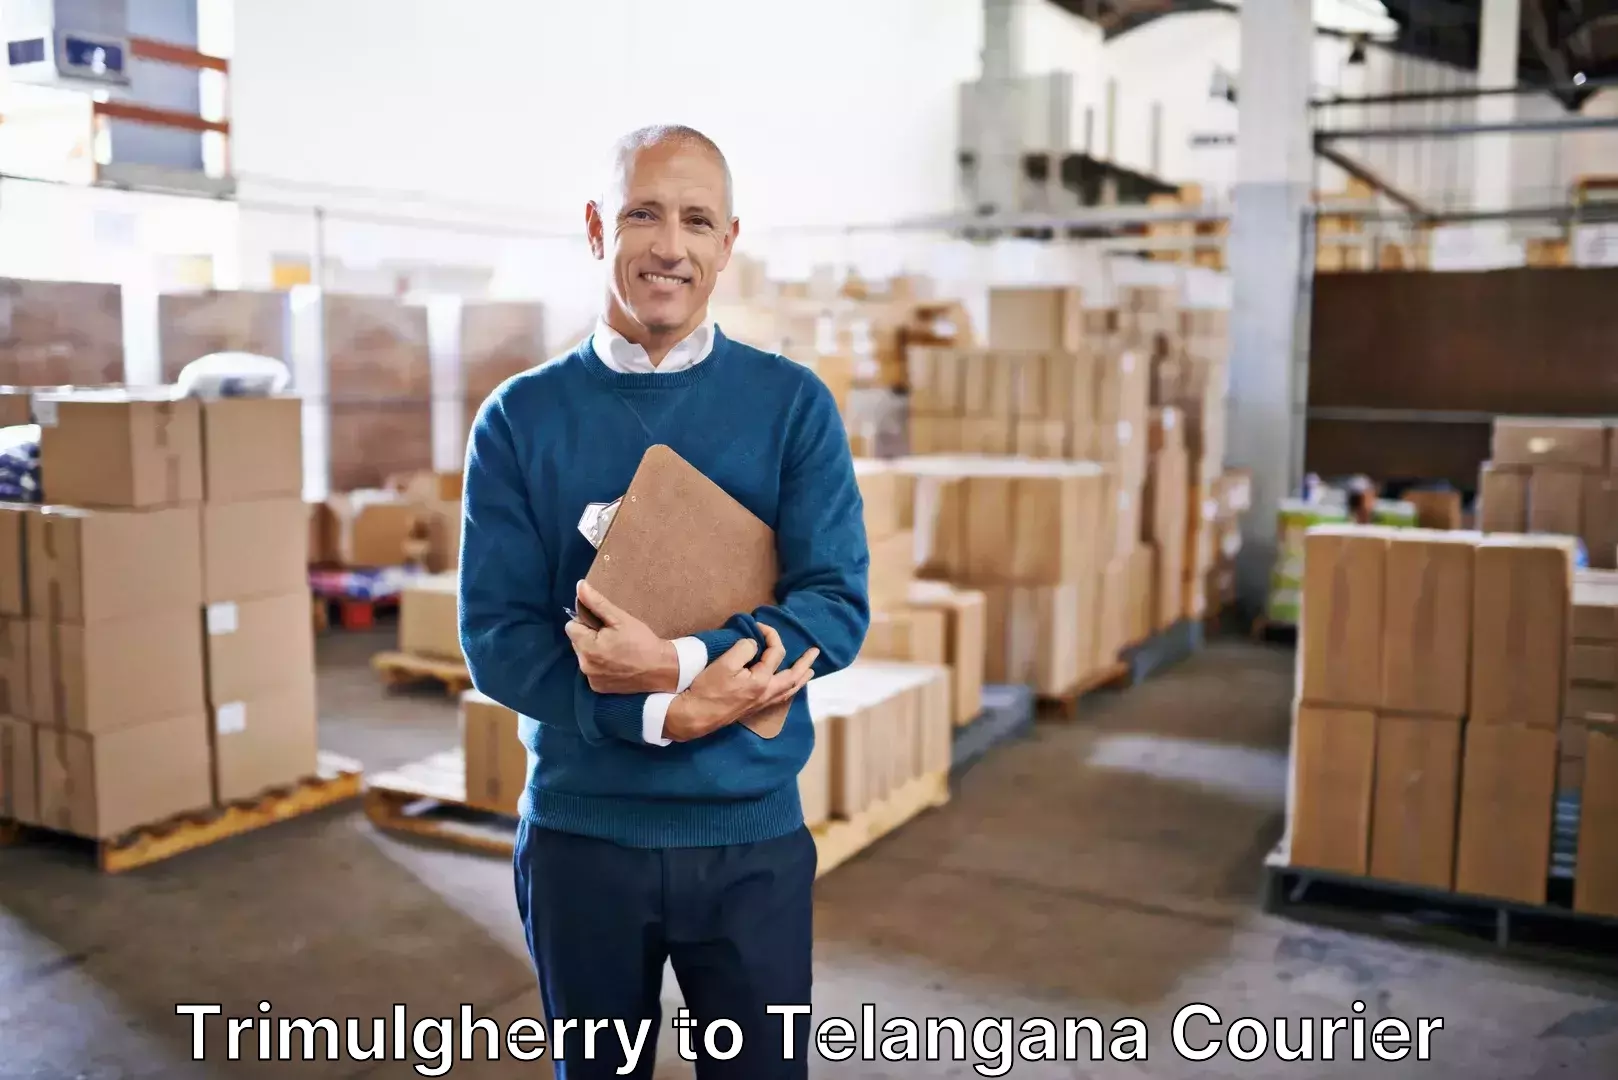 Luggage shipping service Trimulgherry to Alair